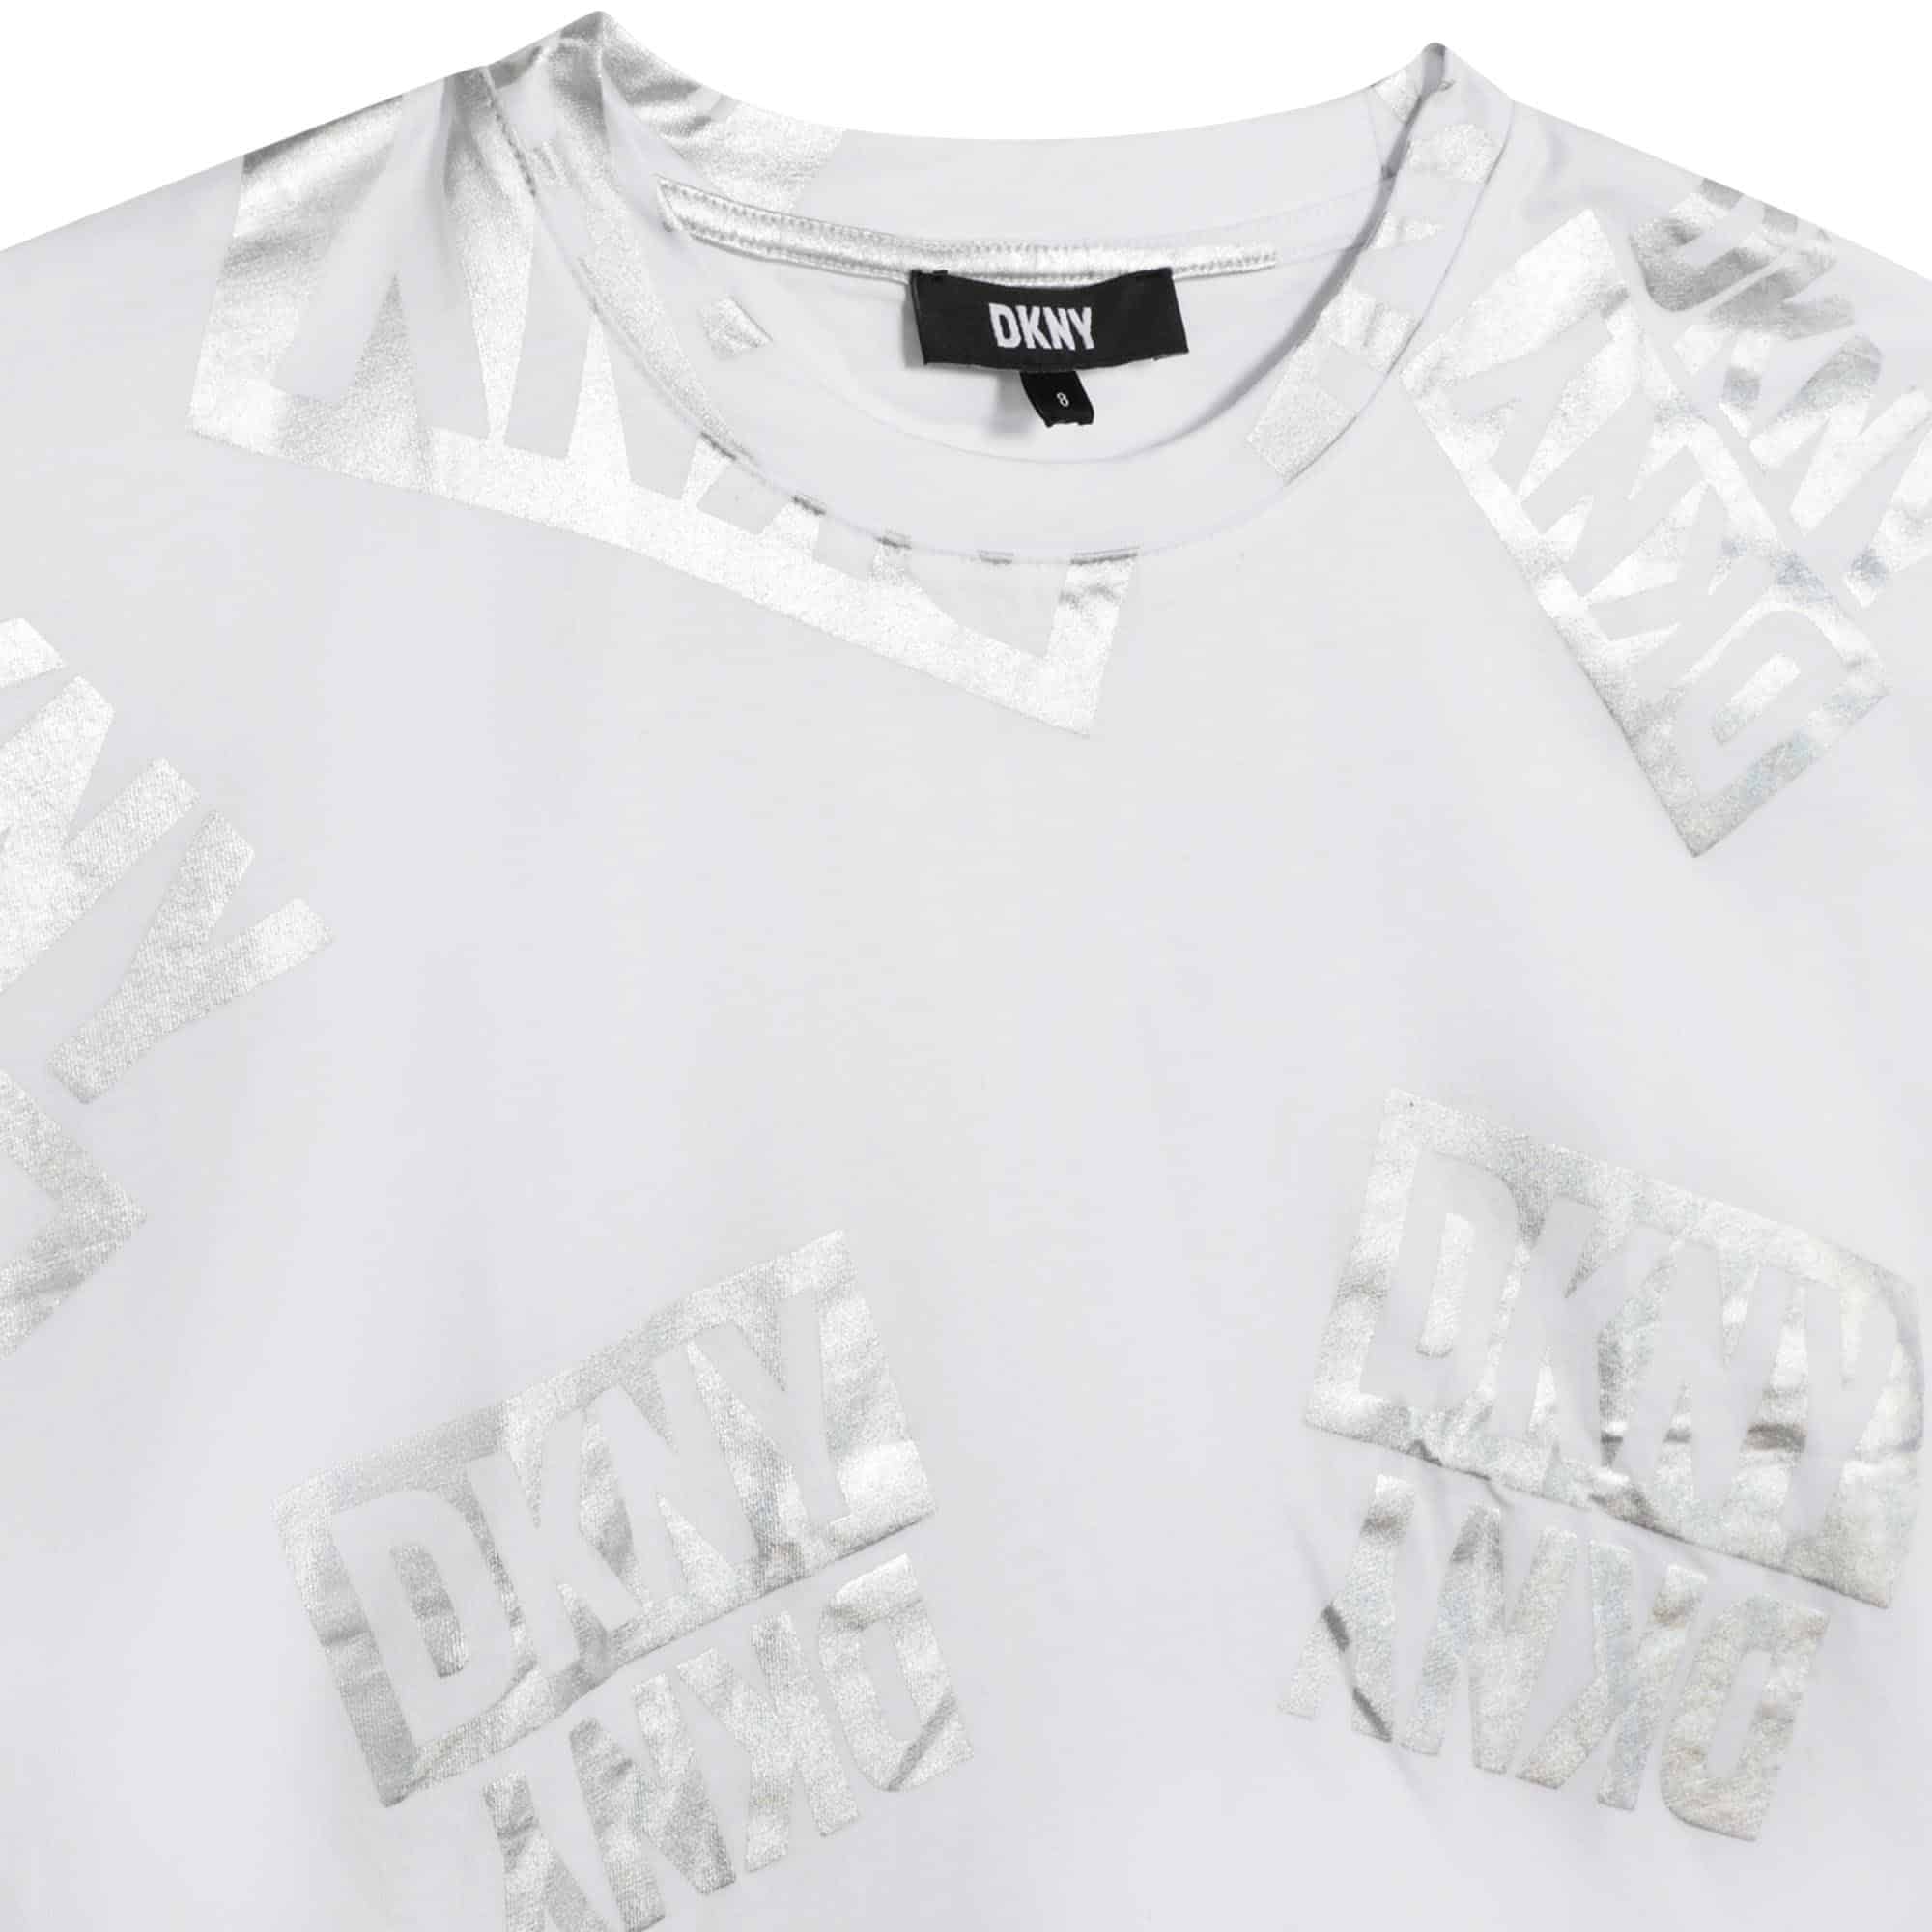 DKNY girls white tshirt with multiple silver logos close up